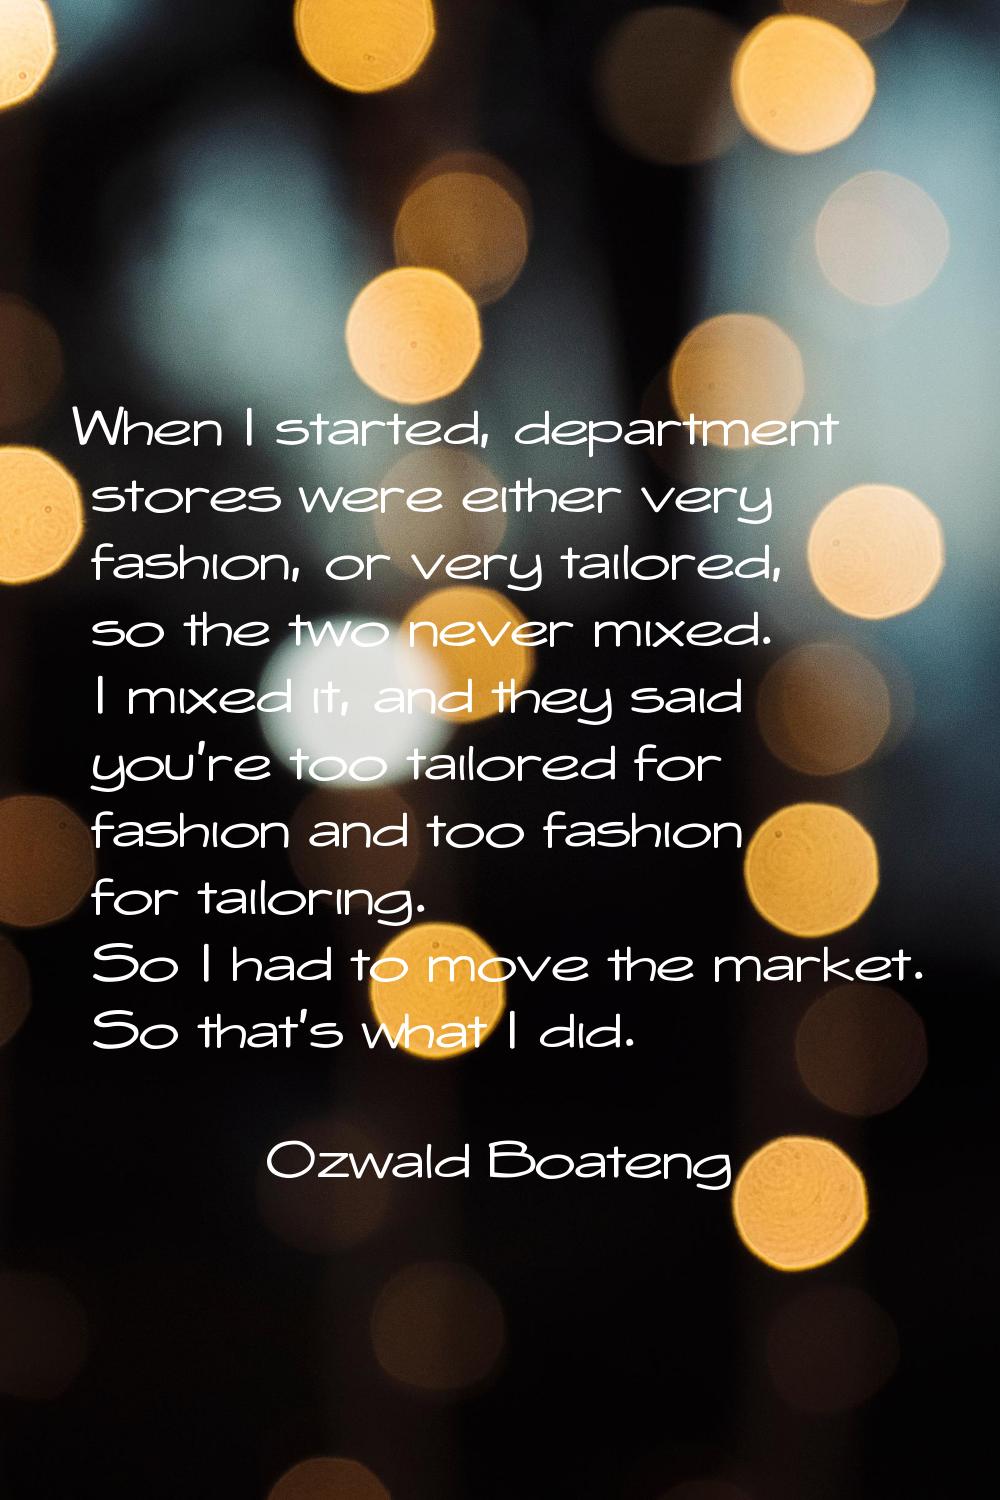 When I started, department stores were either very fashion, or very tailored, so the two never mixe